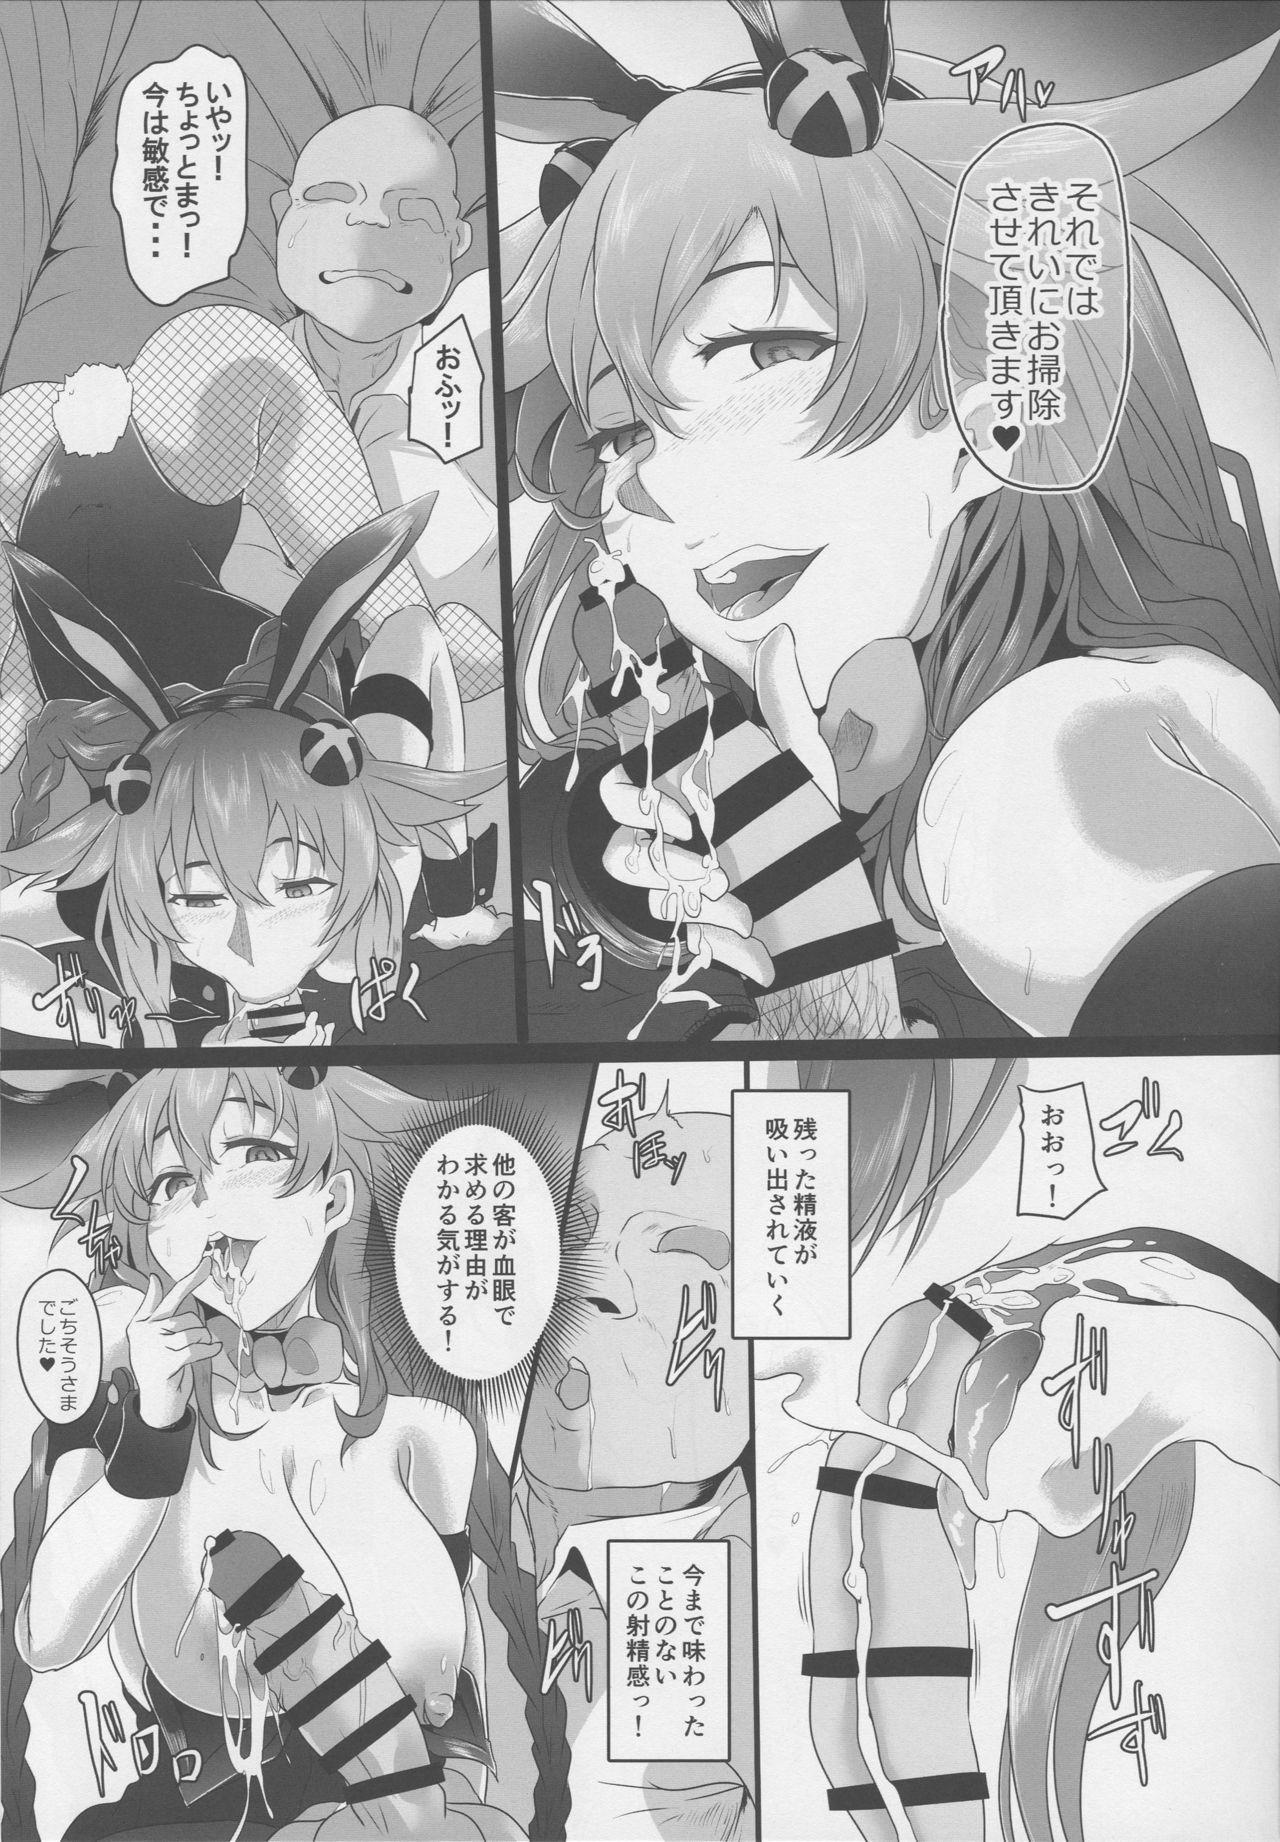 Hard Core Free Porn Fallen Heart Another √Chaos - Hyperdimension neptunia Lady - Page 12